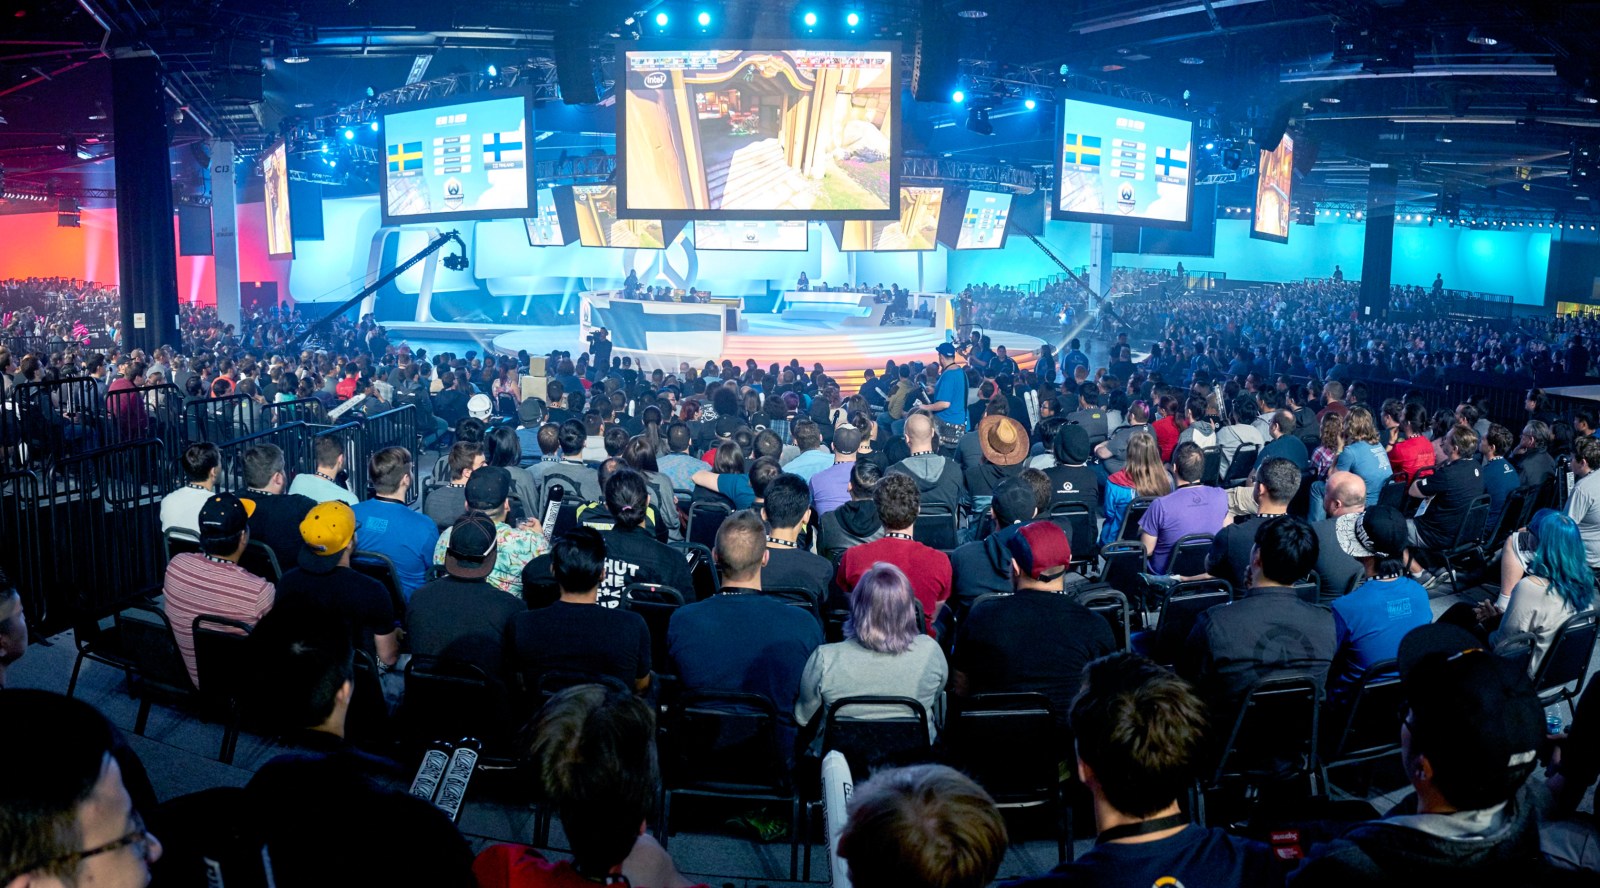 Overwatch_World_Cup_held_at_the_Overwatch_Arena_@_BlizzCon_2016_-_Anaheim__CA_-_Nov_4-5__2016